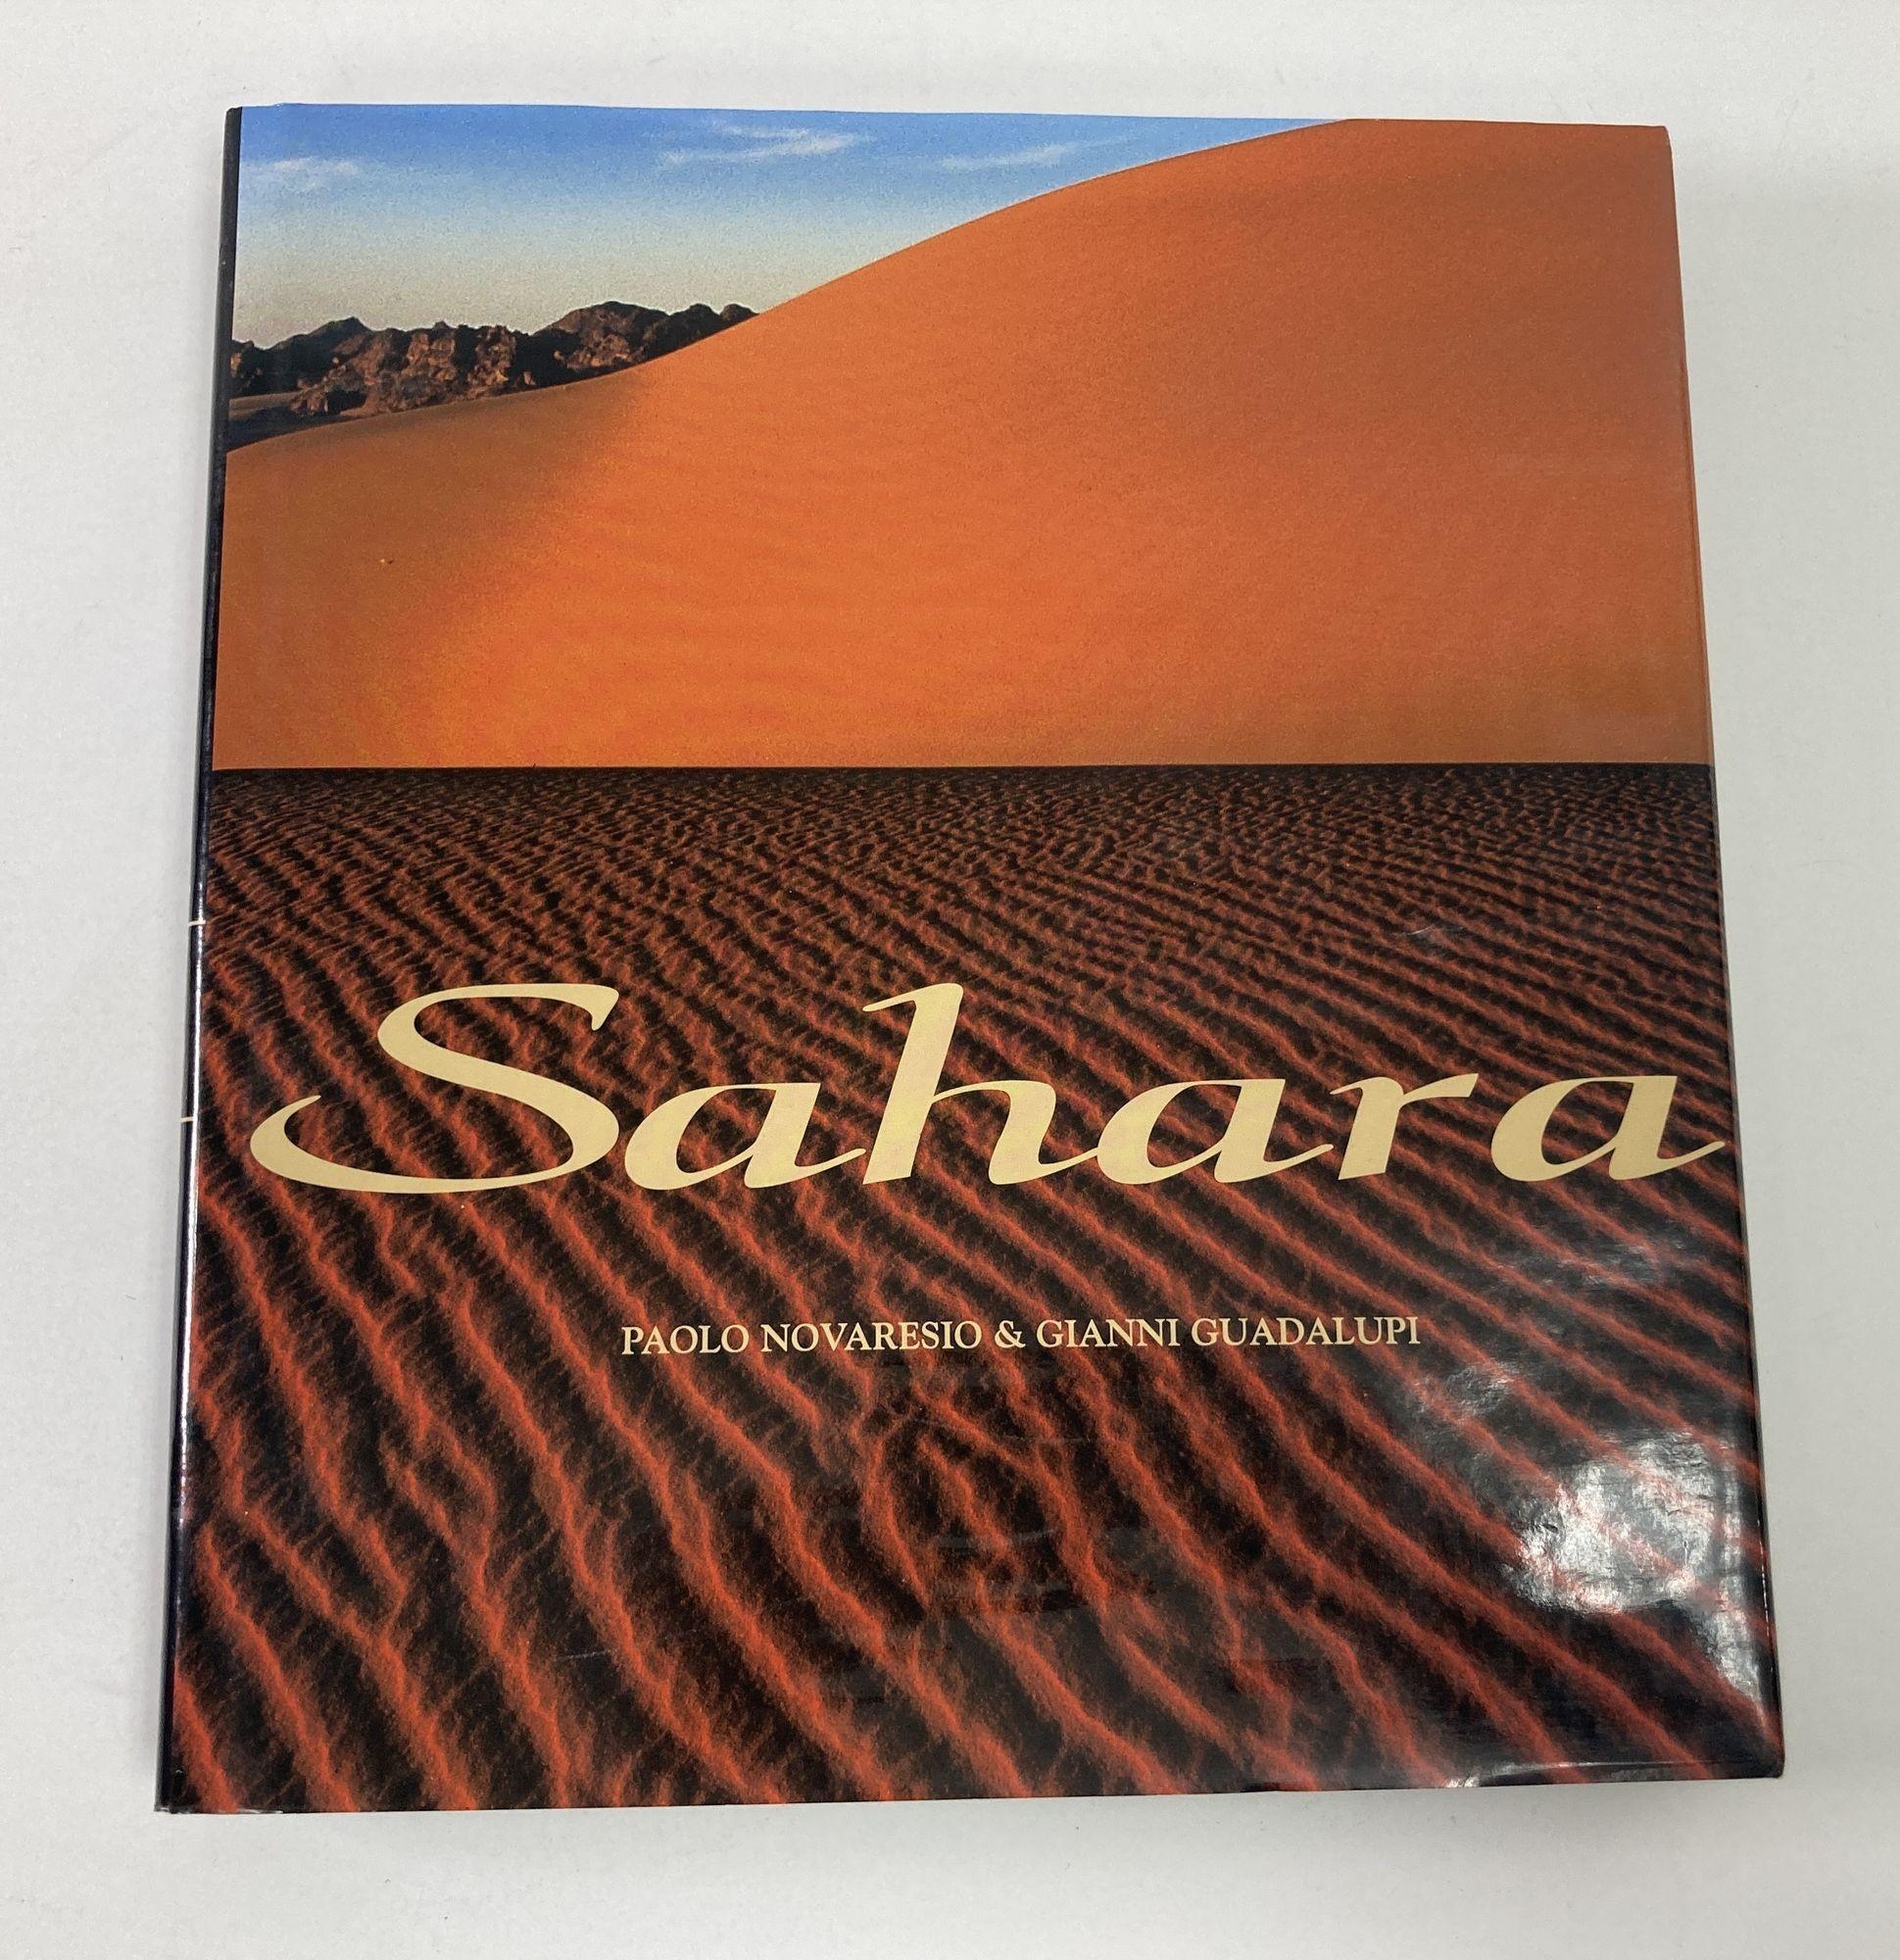 Sahara : an Immense Ocean of Sand by Paolo Novaresio, Gianni Guadalupi Hardcover Book.
The Sahara Desert is not just a wasteland of sand and sun, but a teeming wilderness. Sahara: An Immense Ocean of Sand tells the story of the world's largest